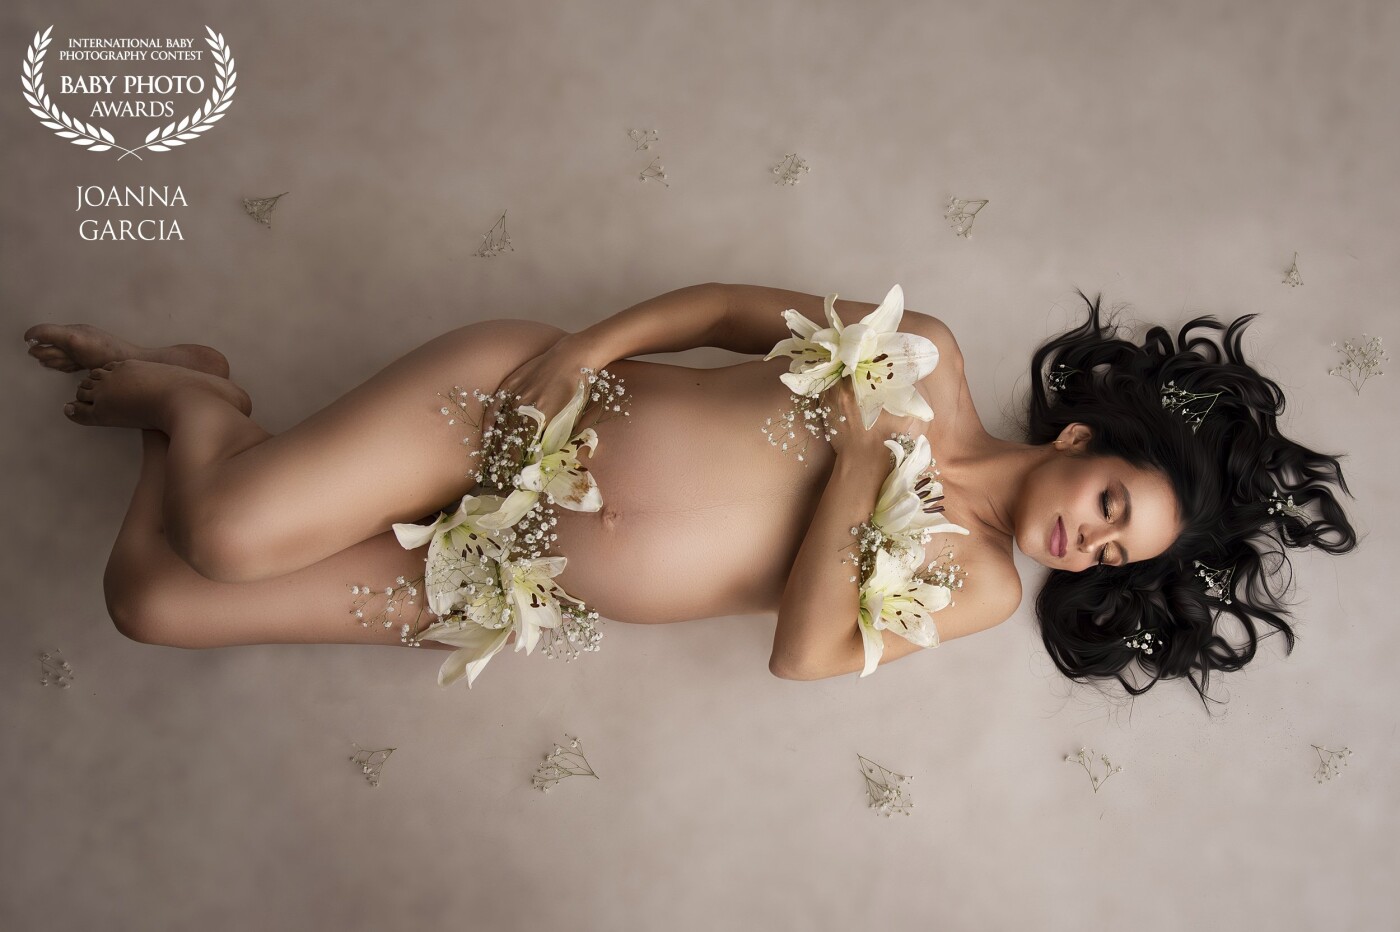 My photographs are characterized by having something related to nature, I grew up in the middle of flower crops, and what better way than to show this contact of mother nature in a maternity session.